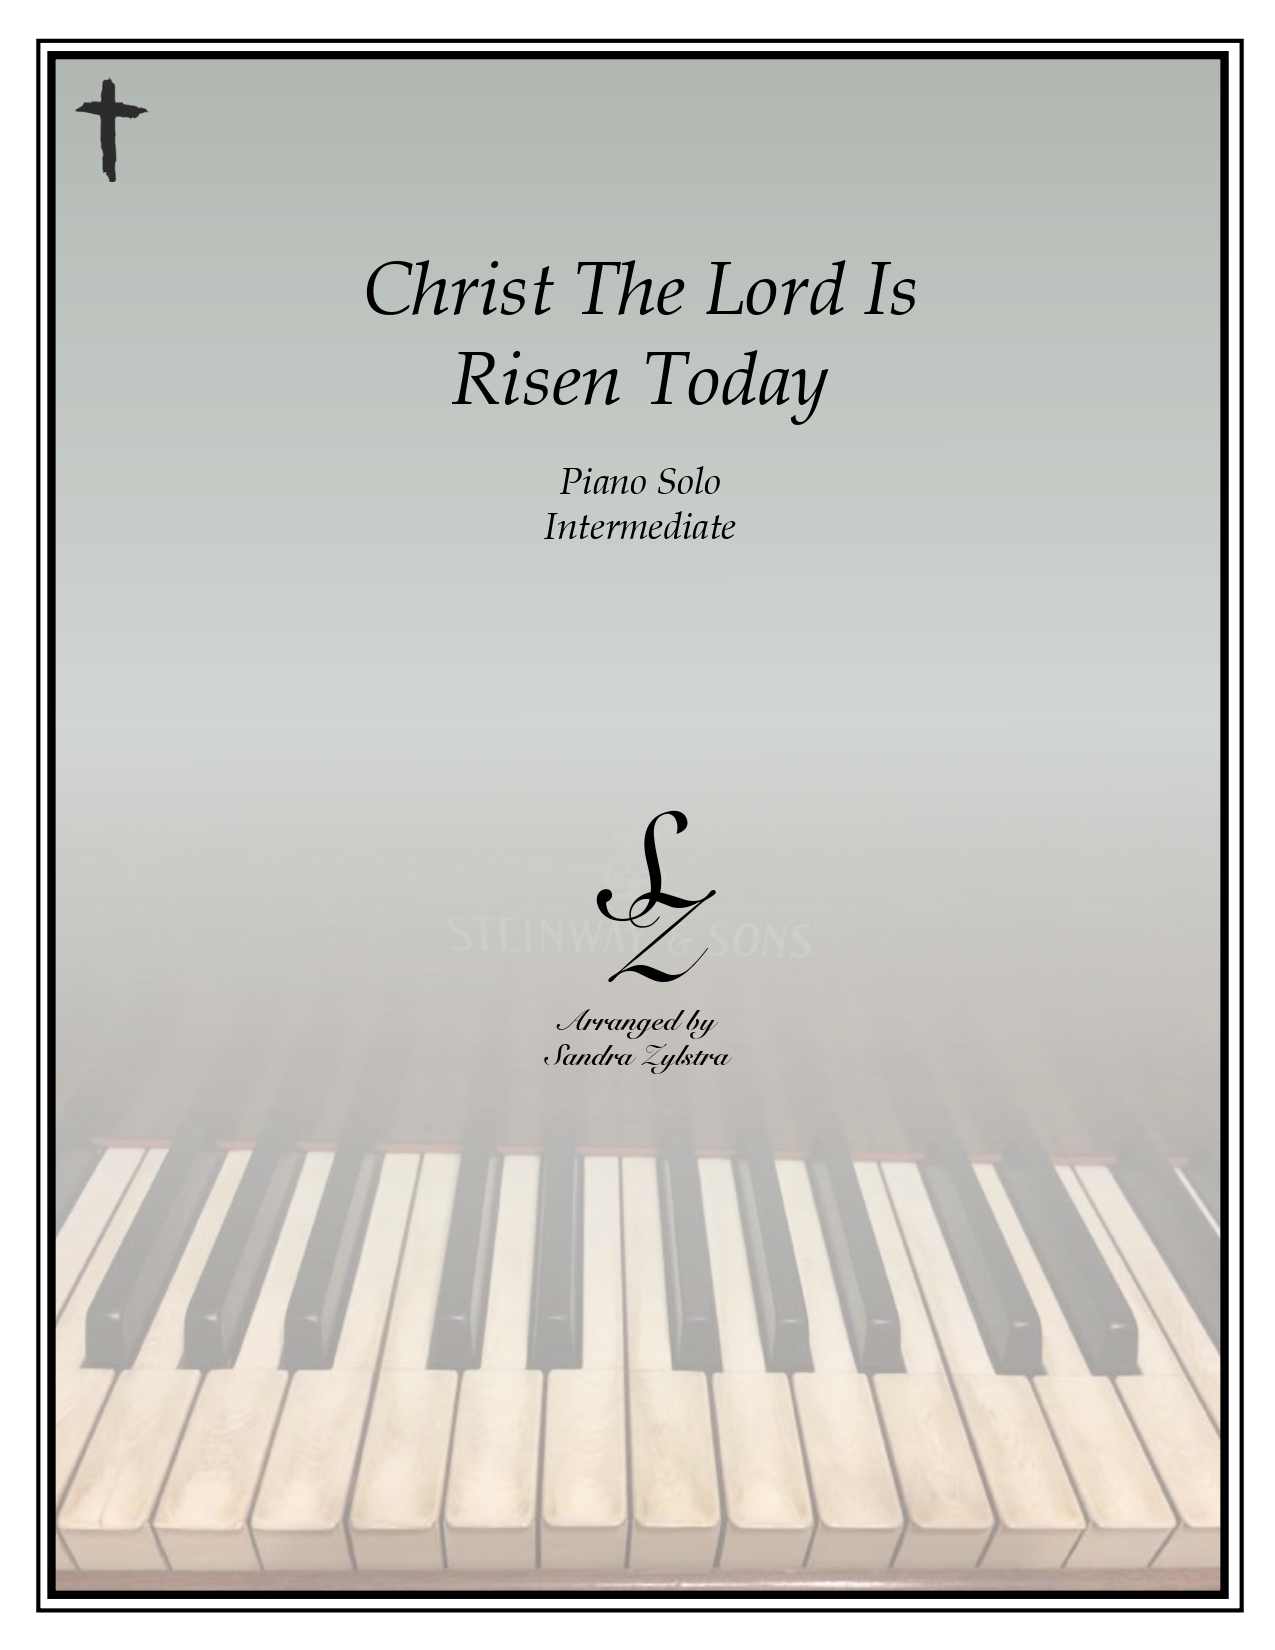 Christ The Lord Is Risen Today intermediate piano cover page 00011